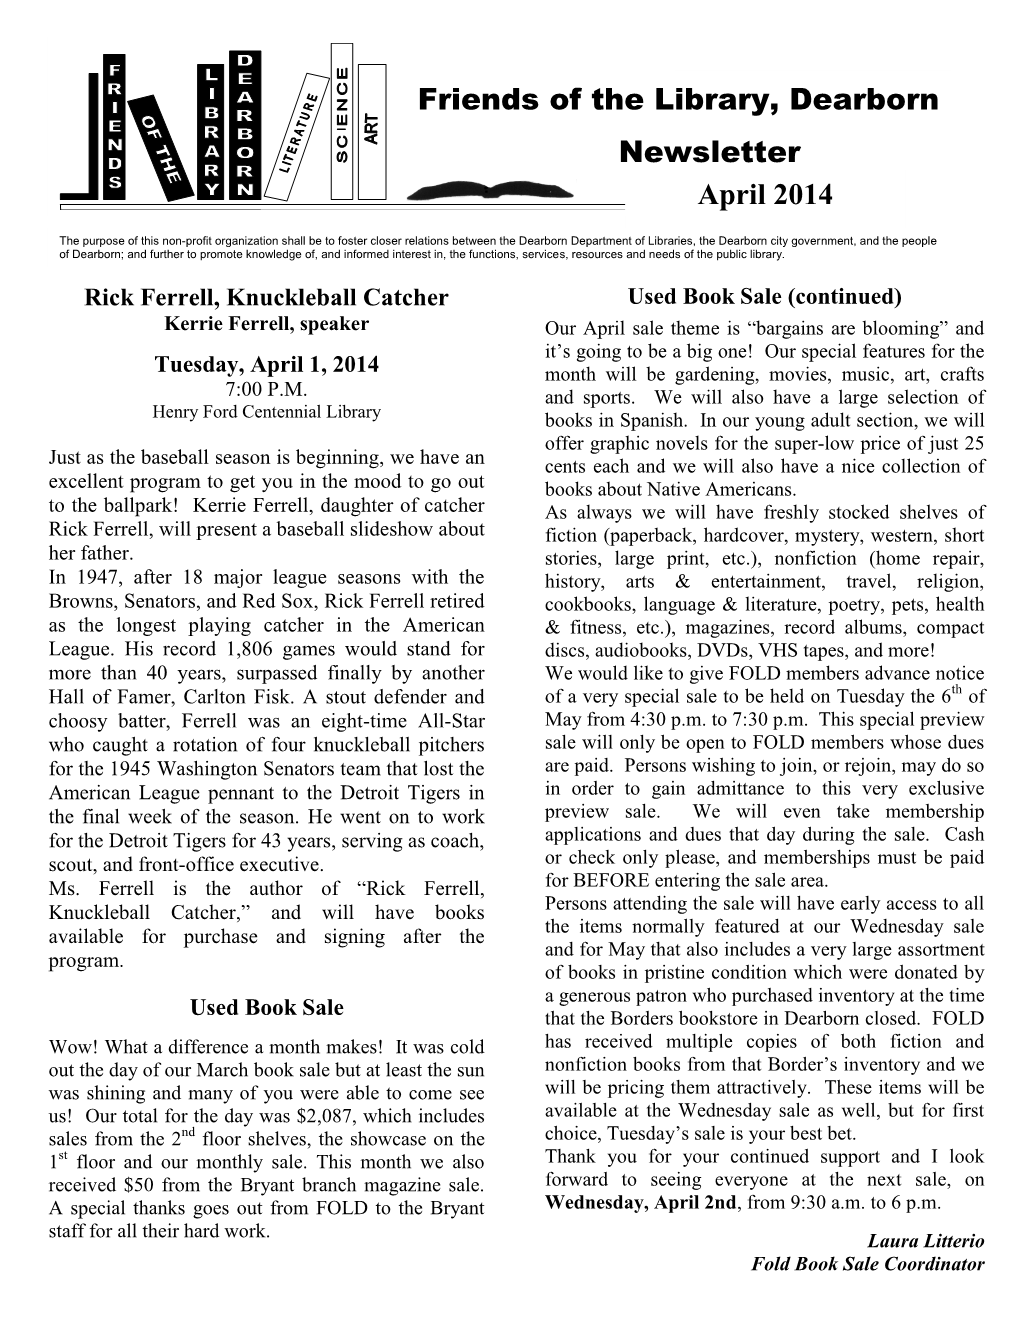 Friends of the Library, Dearborn Newsletter April 2014